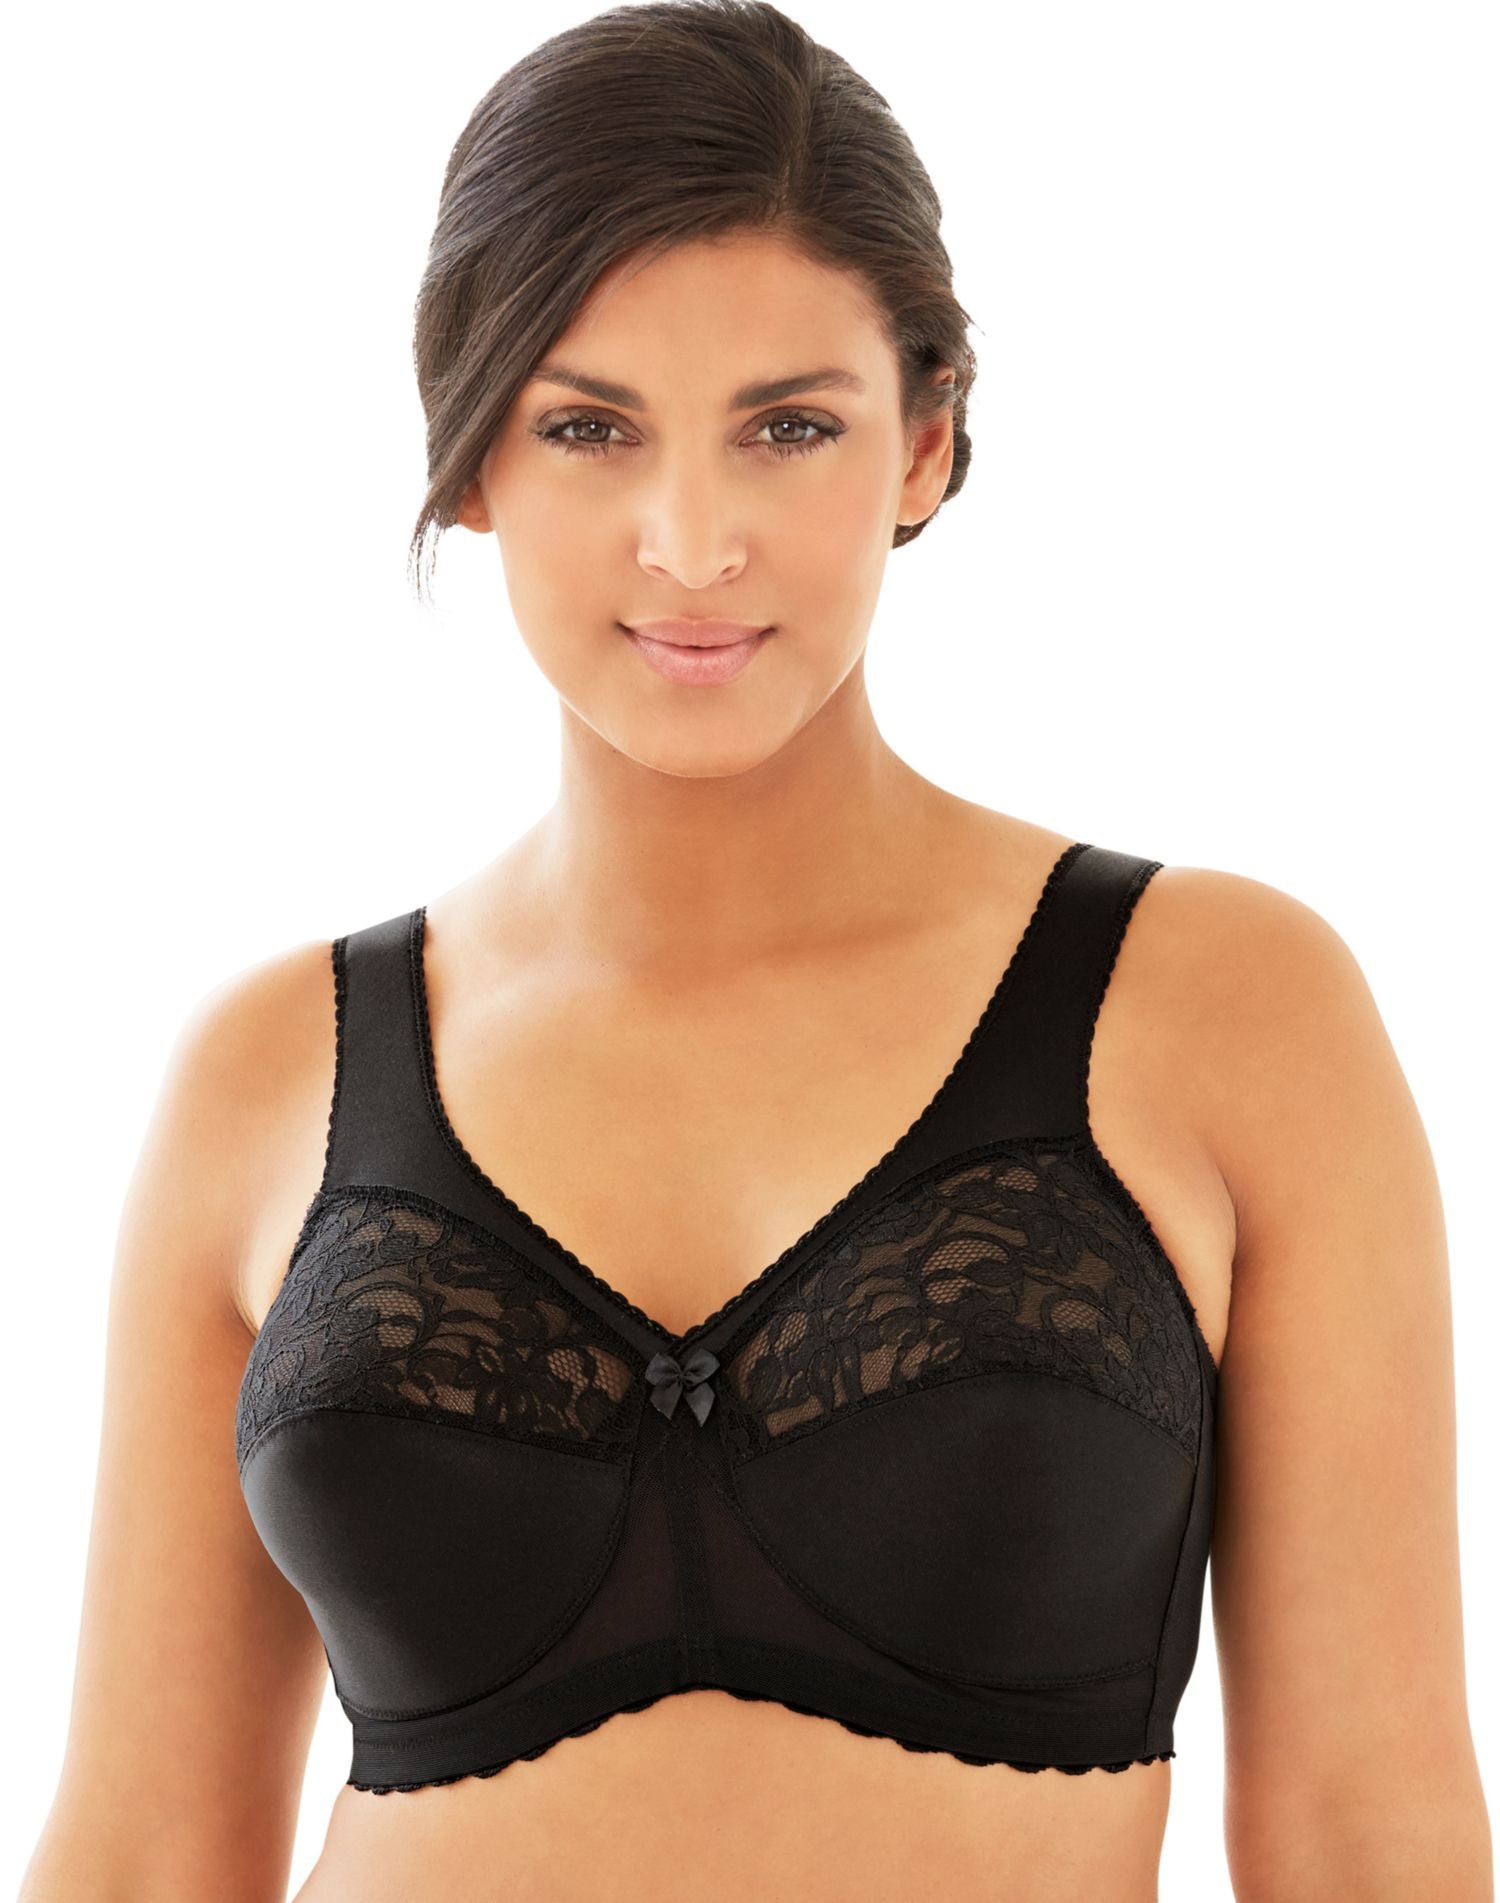 Buy Glamorise Magic Lift All-Over Lace Bra G-1012 46H/Cafe at